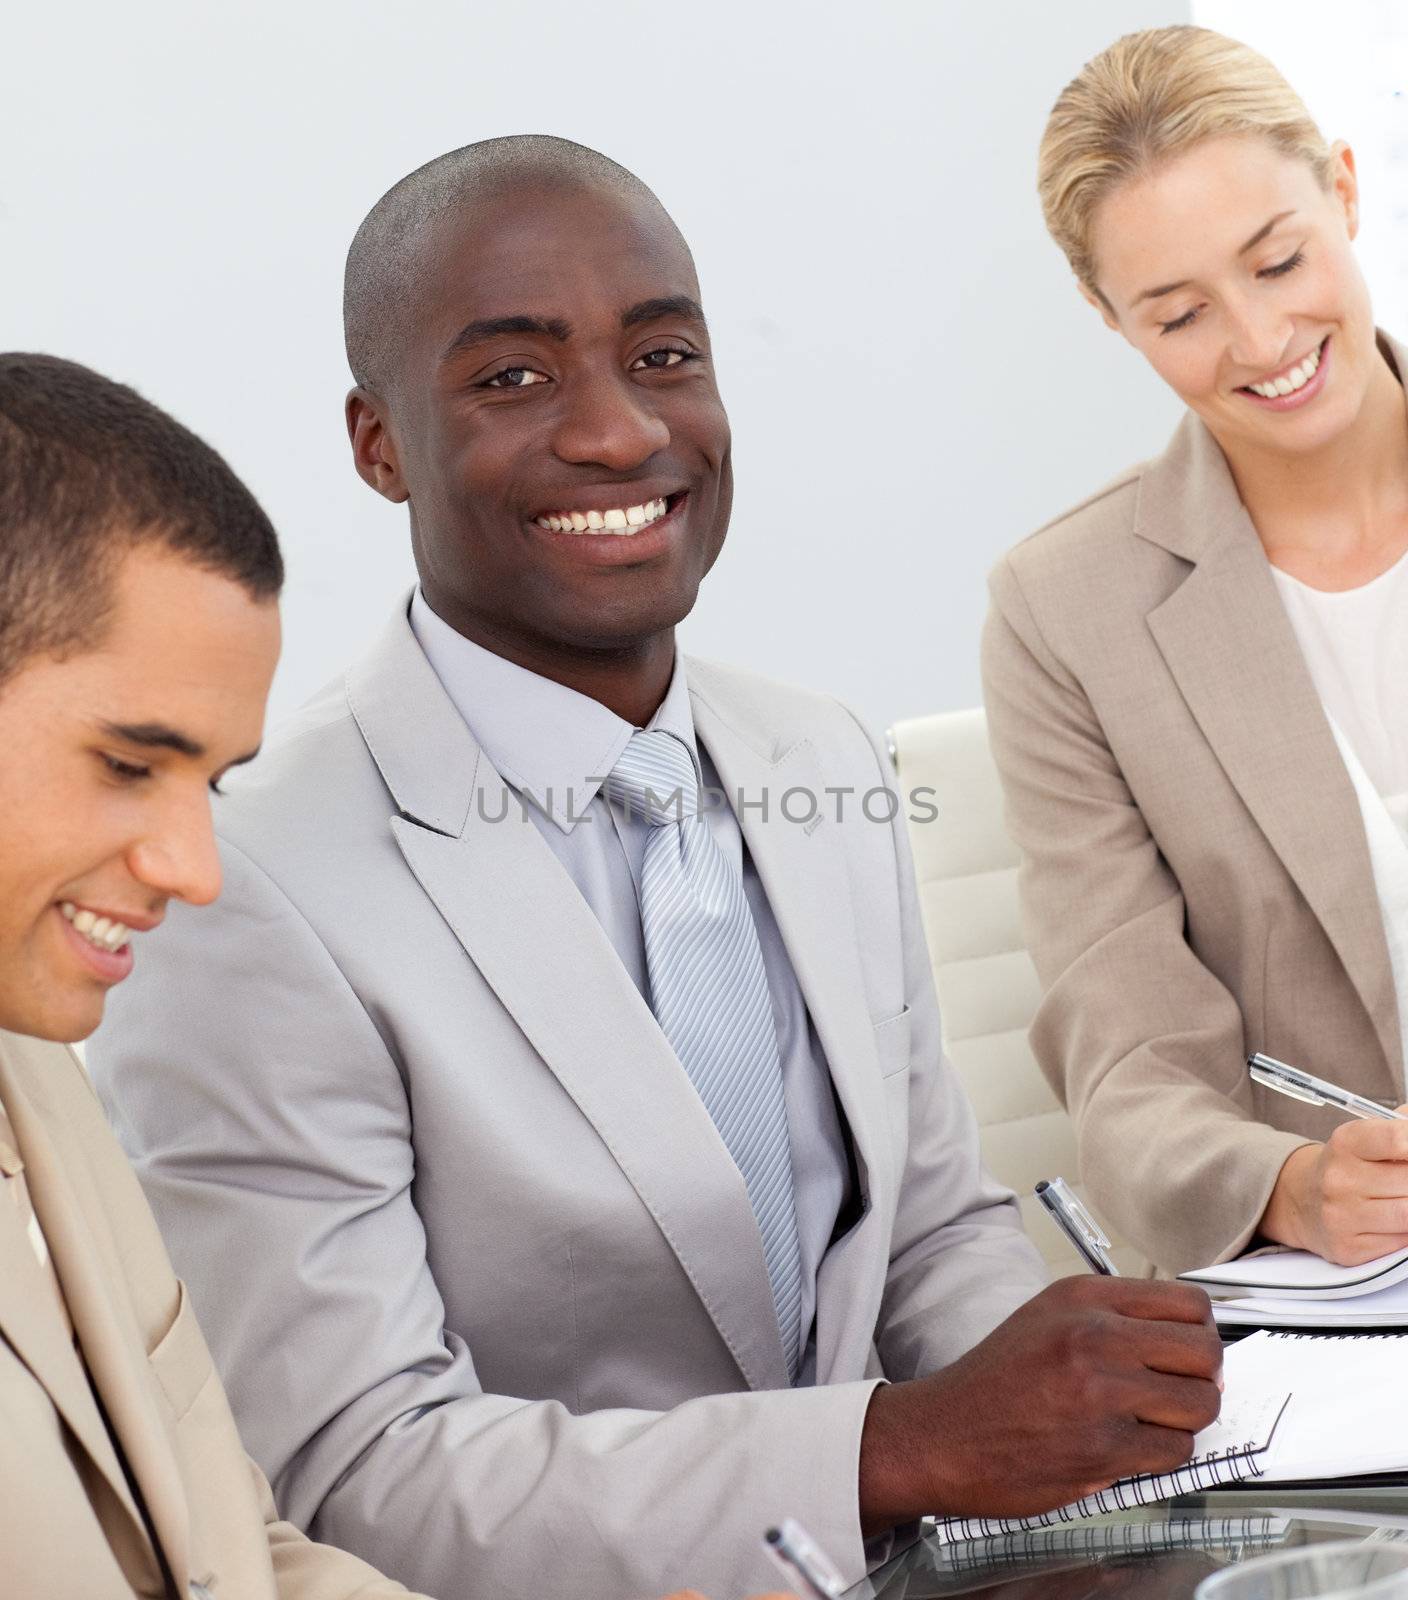 Business People Smiling in a meeting  by Wavebreakmedia